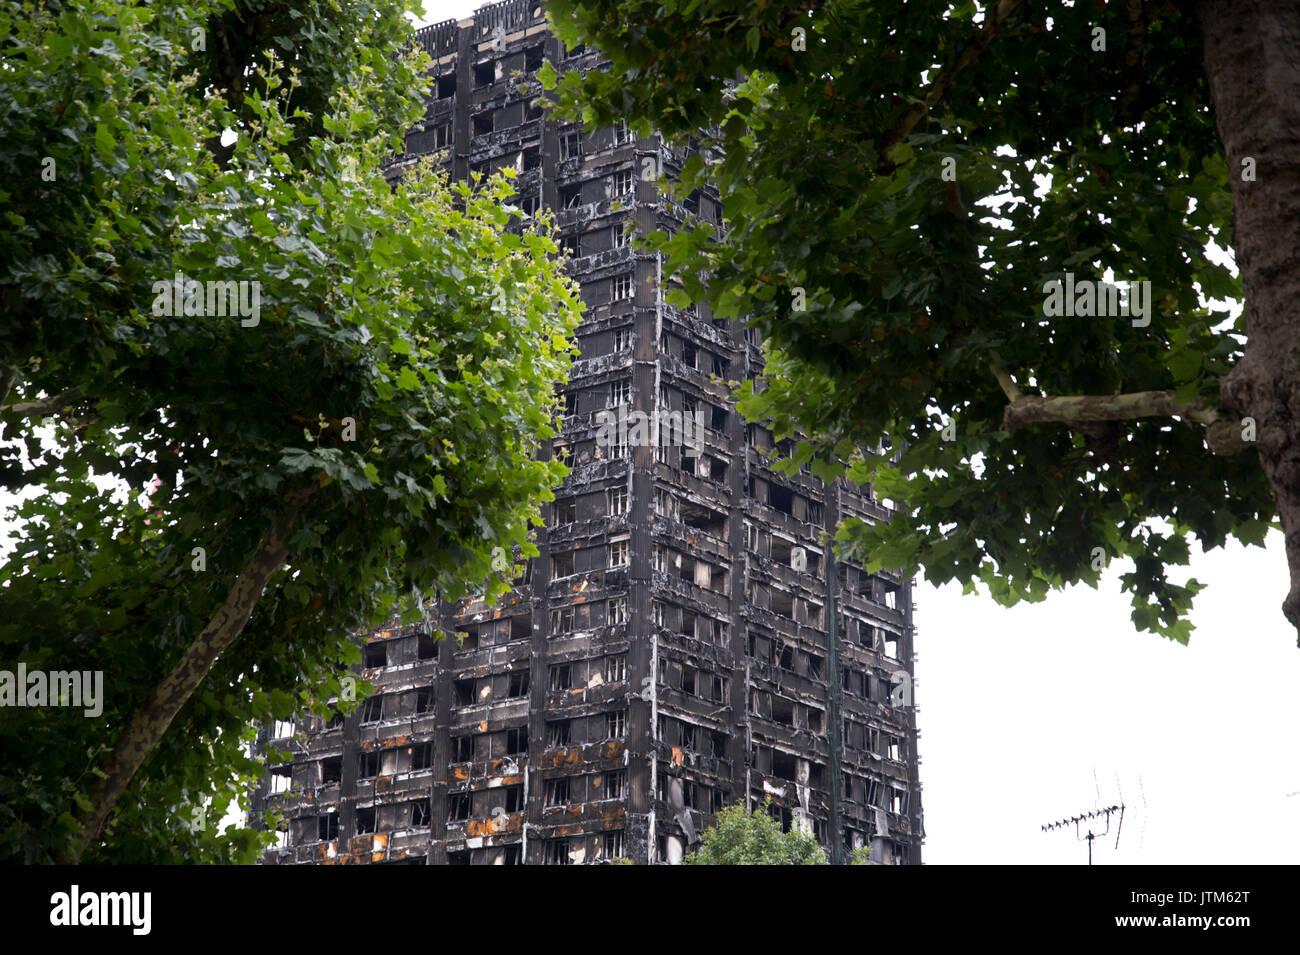 Grenfell Tower, West London. Aftermath of the tragedy. The burnt out housing tower Stock Photo